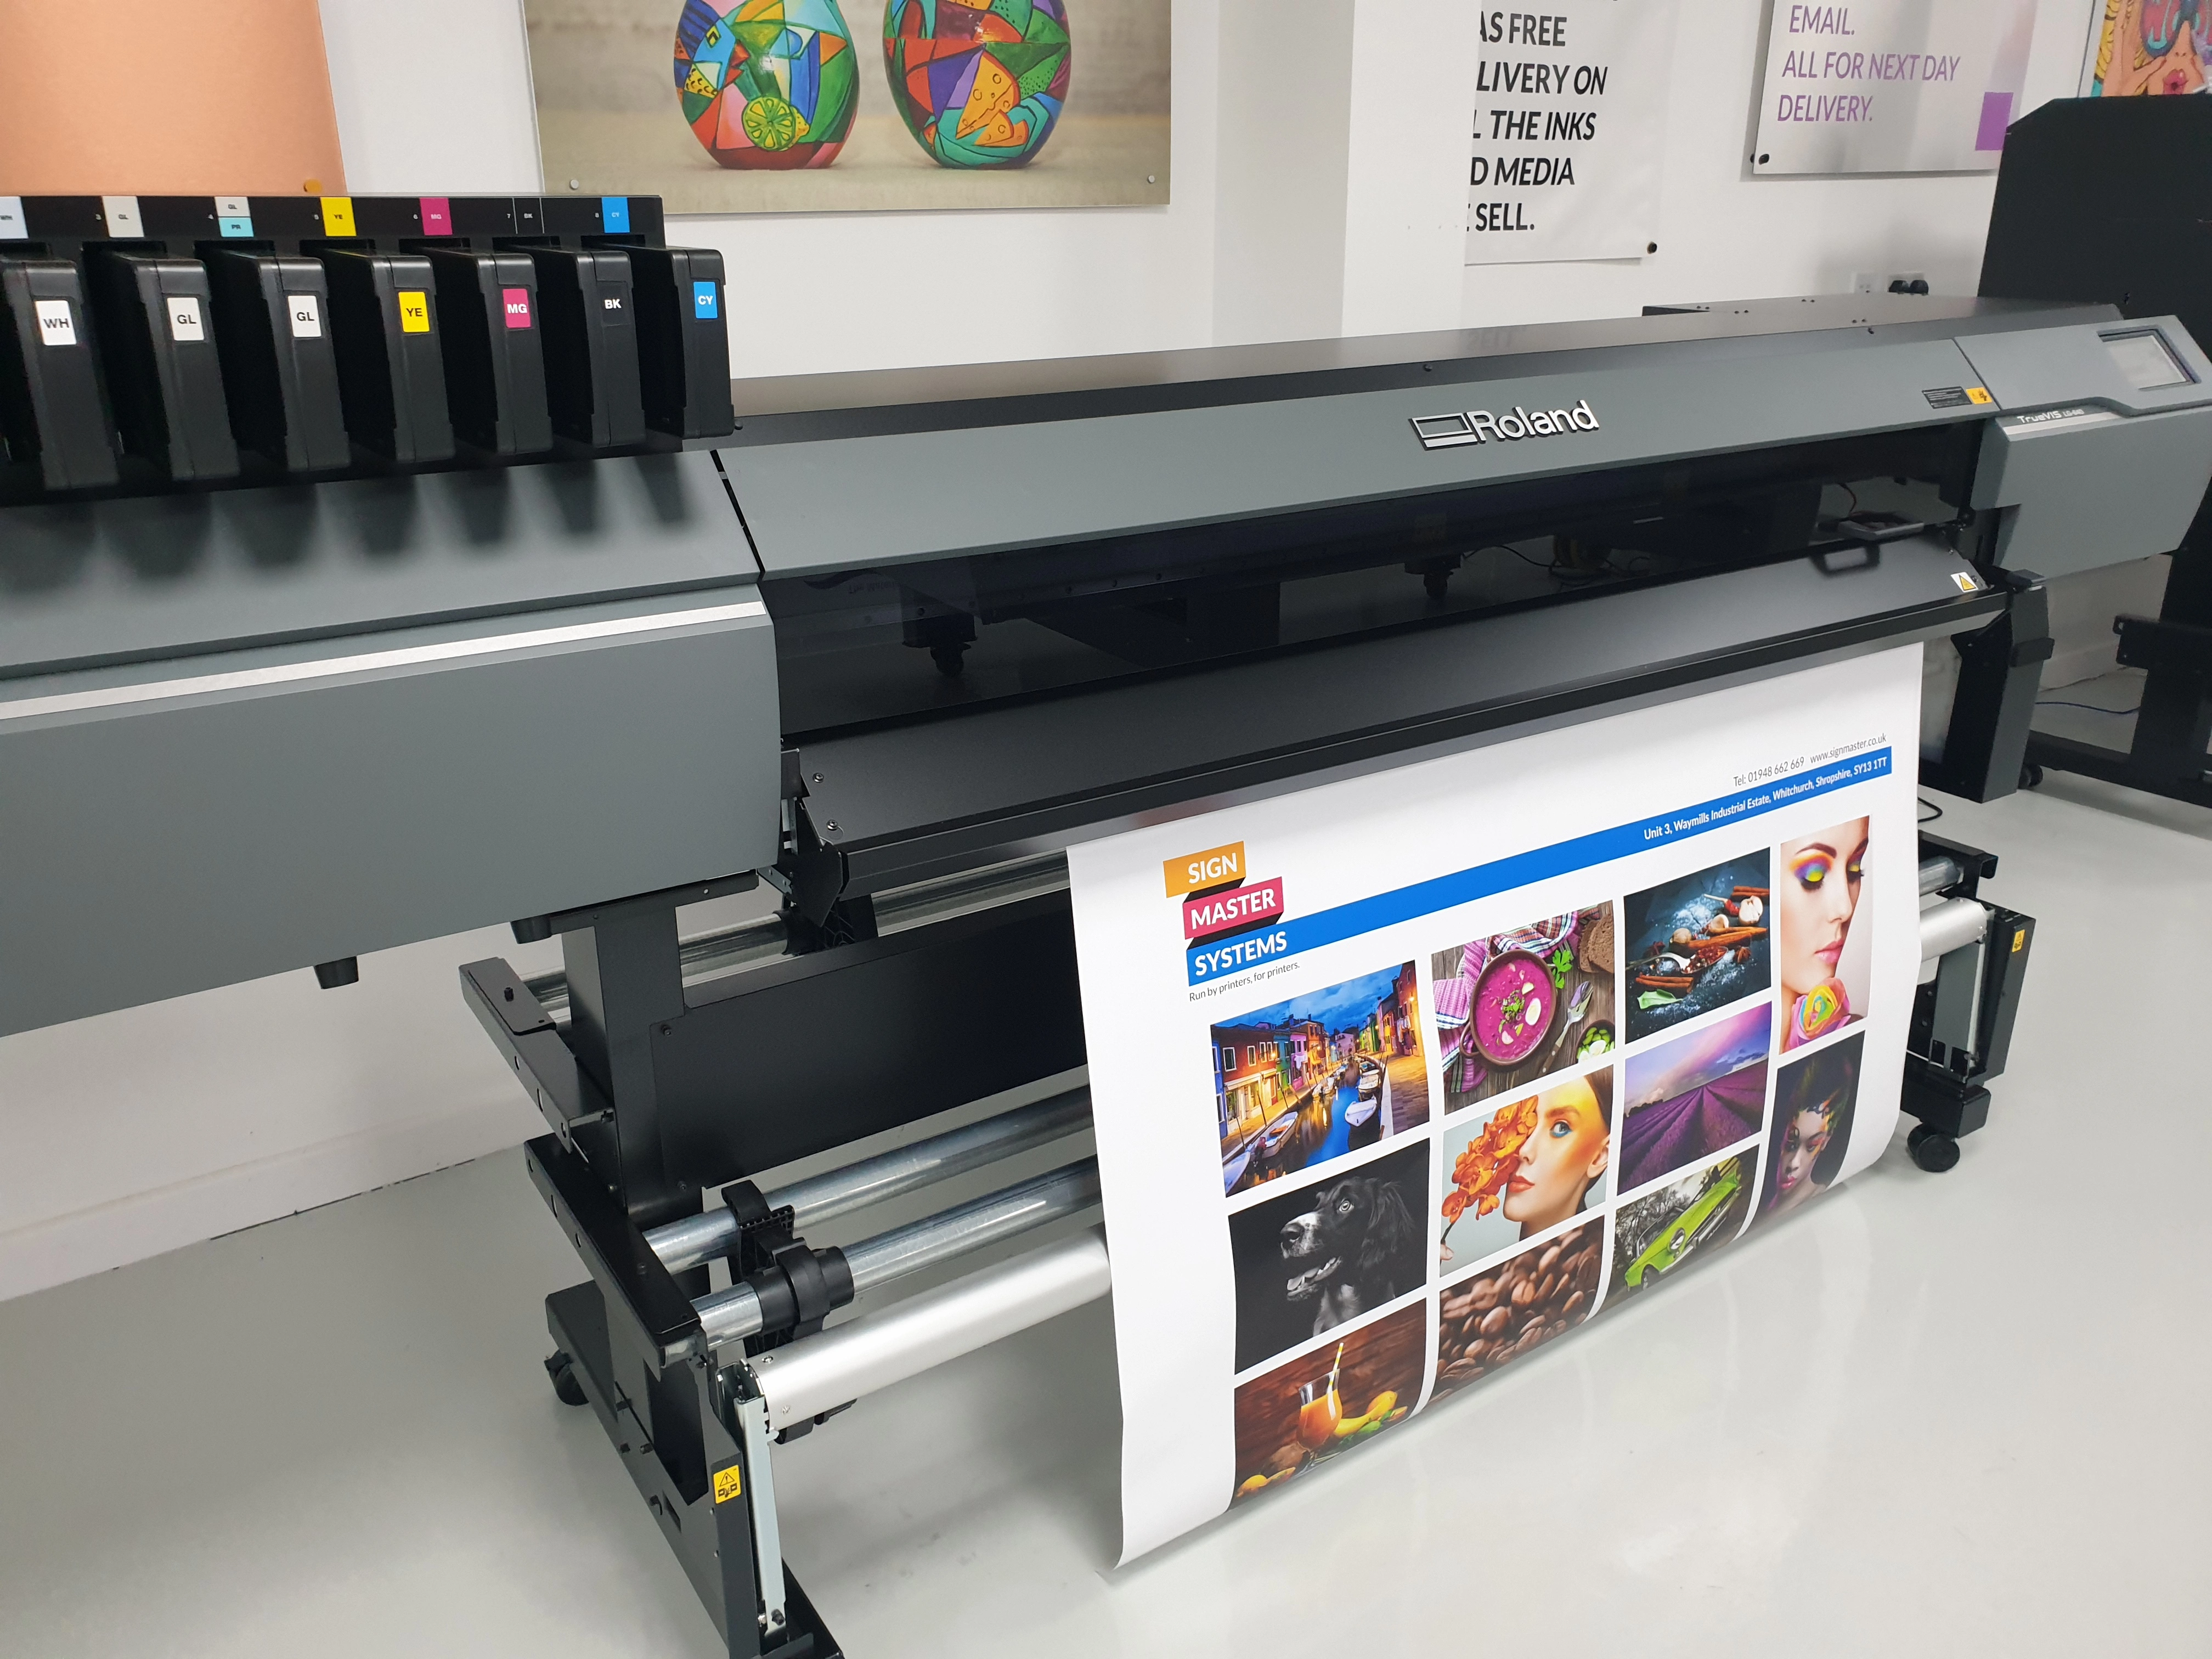 A Roland LG UV print and cut machine showing how it can be used to boost your printing 